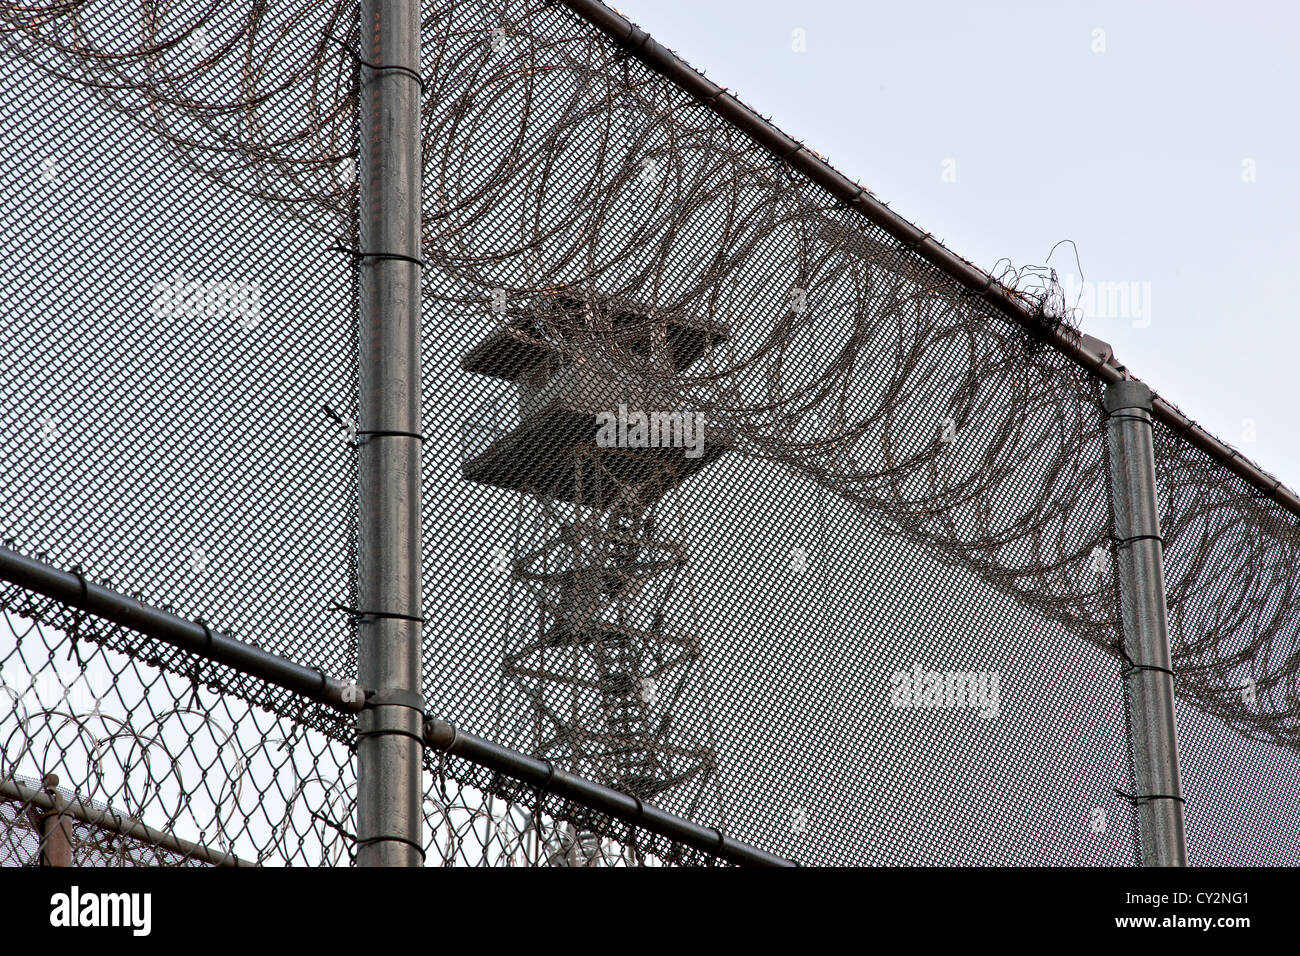 Security fence, guard tower. Stock Photo